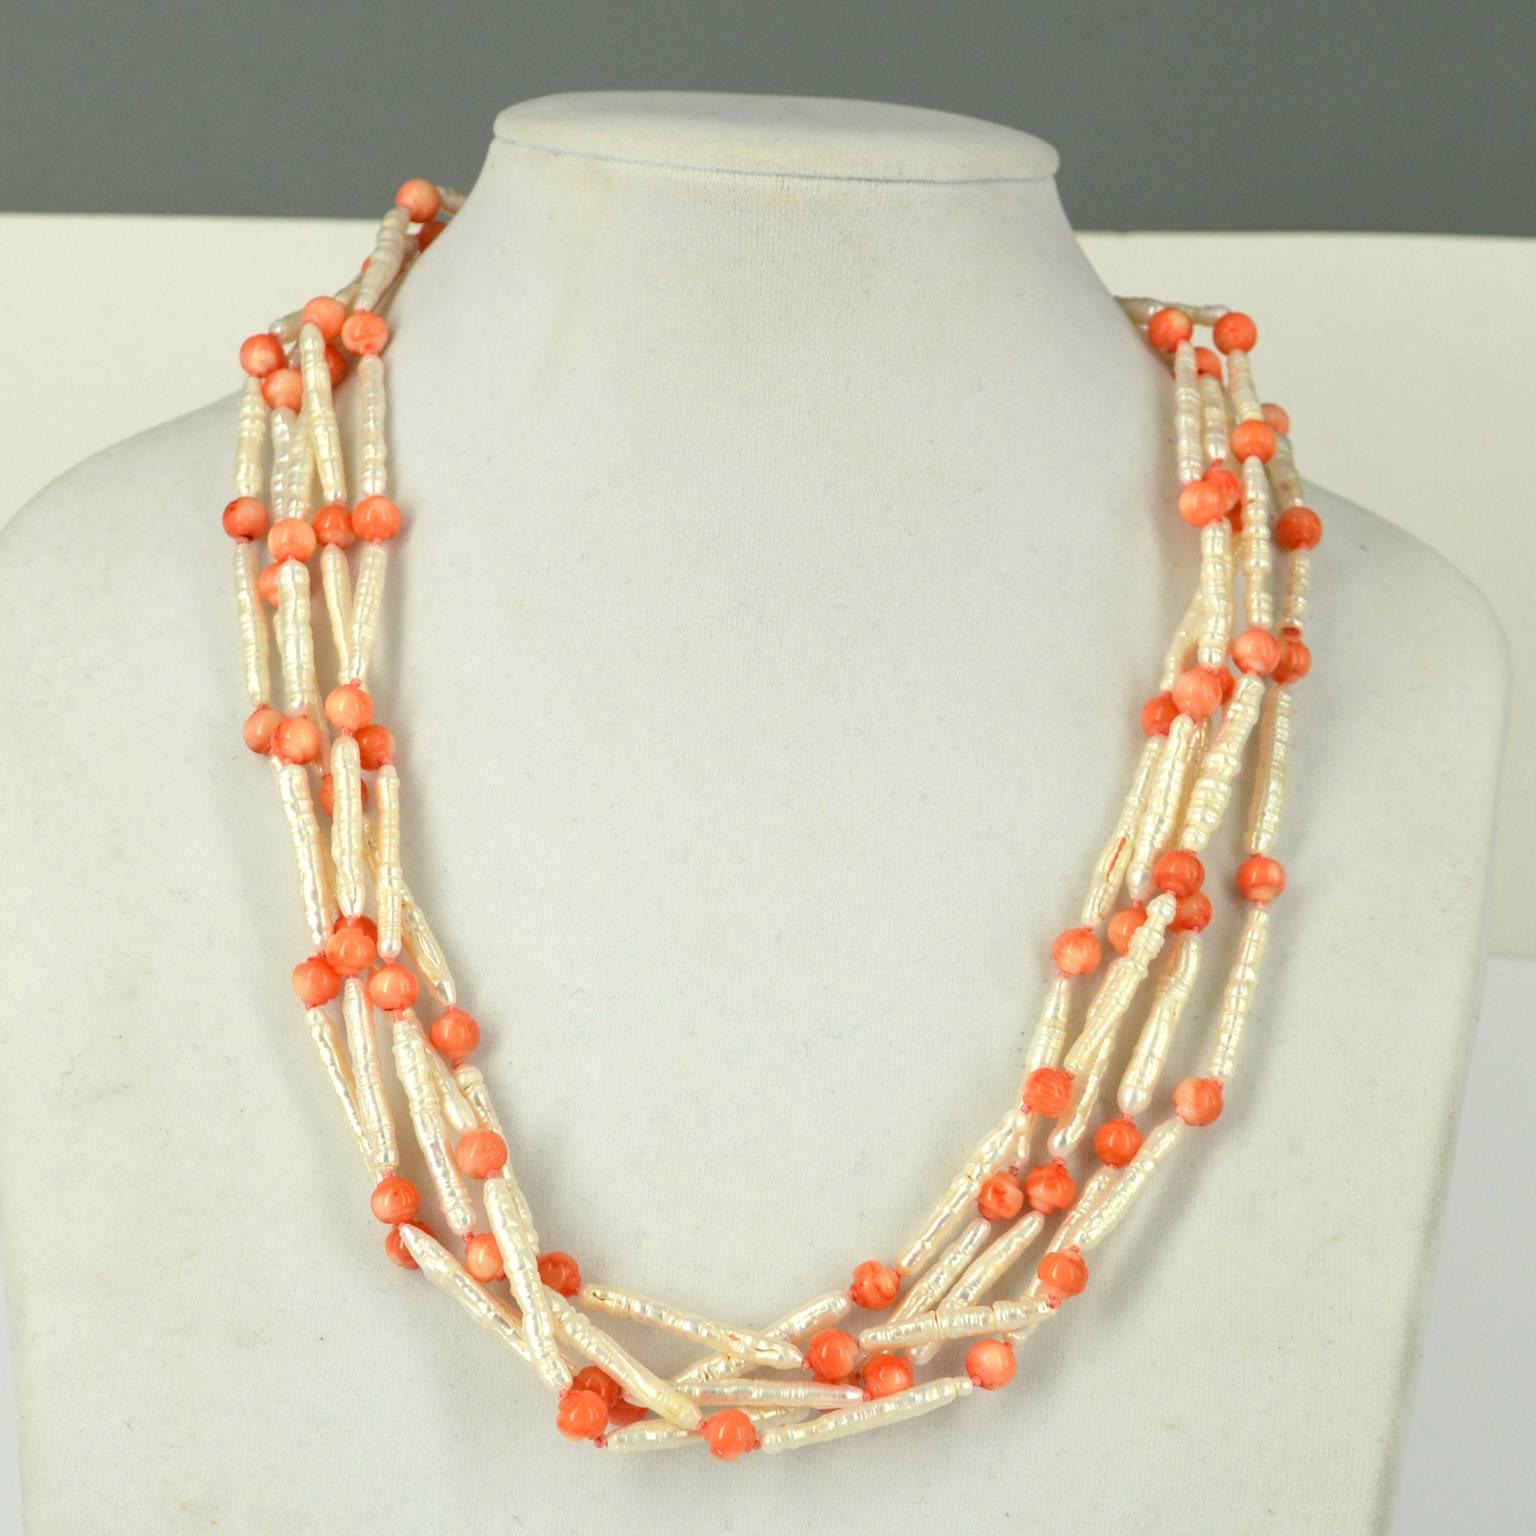 5 strands of fine stick 30x3mm Fresh Water Pearls necklace with 6mm hand carved Apricot Sea Bamboo Coral bead spacers.
Hand knotted on apricot thread with a Sterling Silver hook clasp and Cone.
56cm necklace in total.